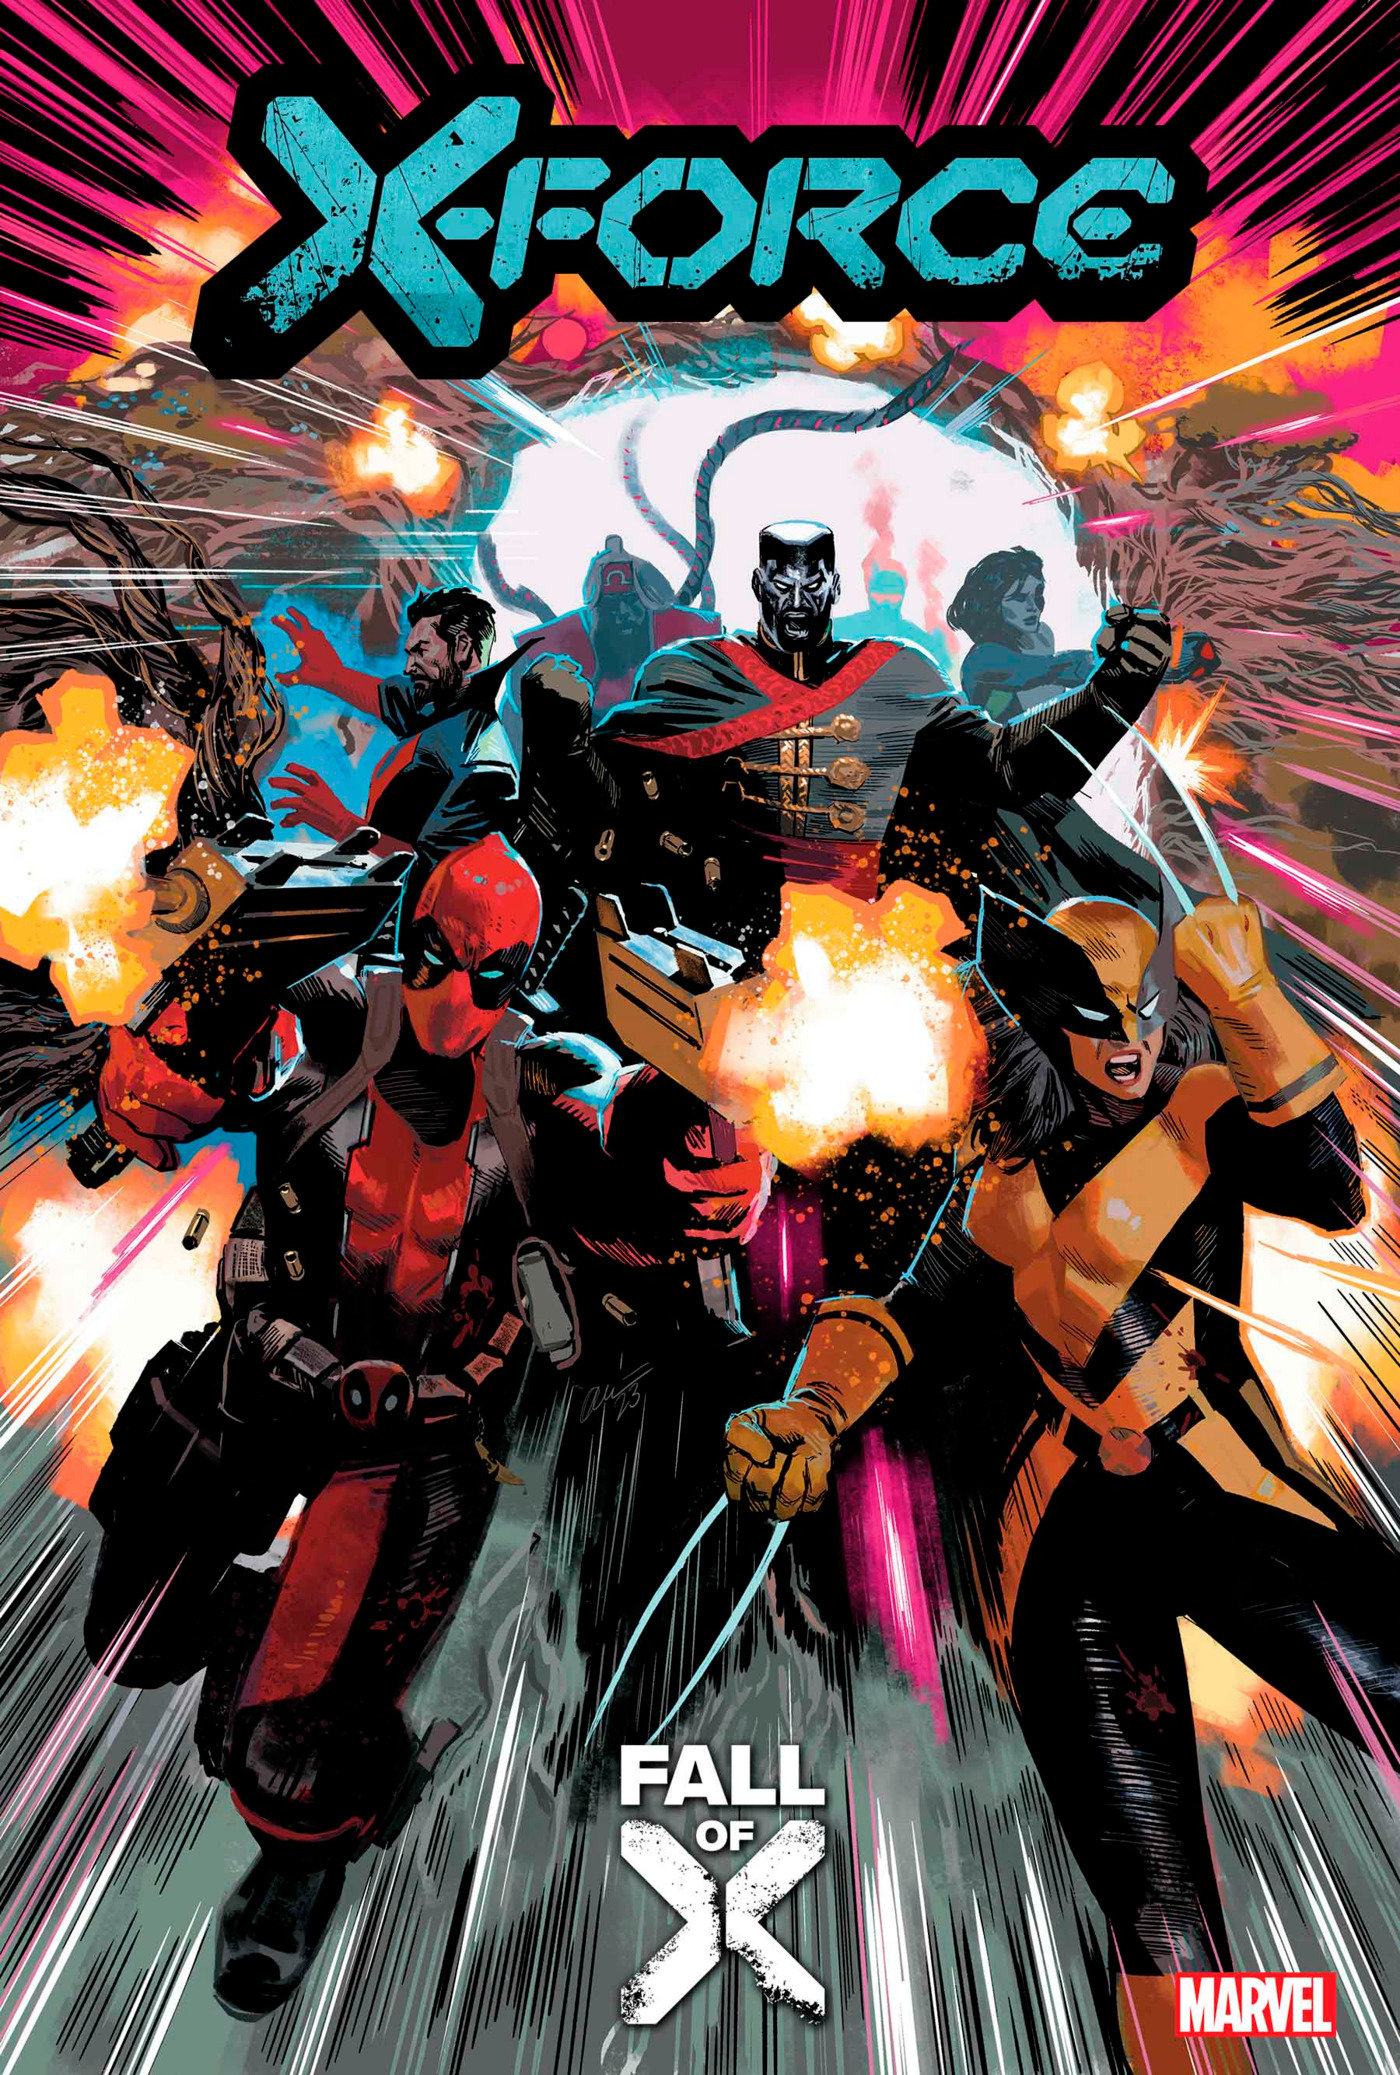 X-Force #43 (Fall of the X-Men)